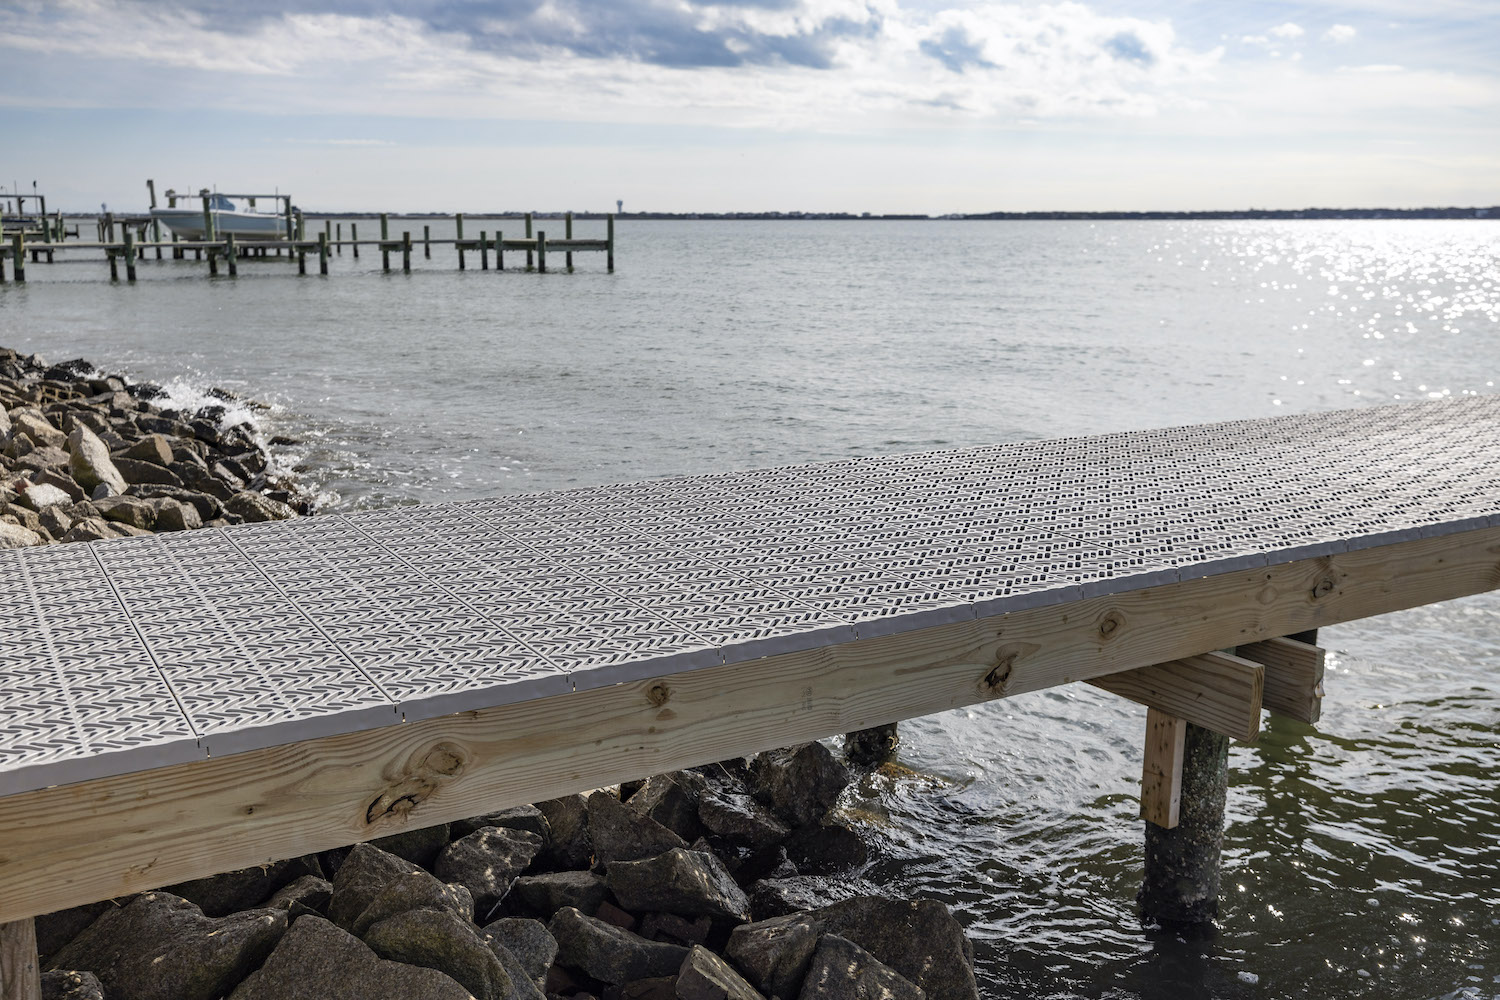 A section of a walkway on a boat deck made from Titan Deck materials is pictured.